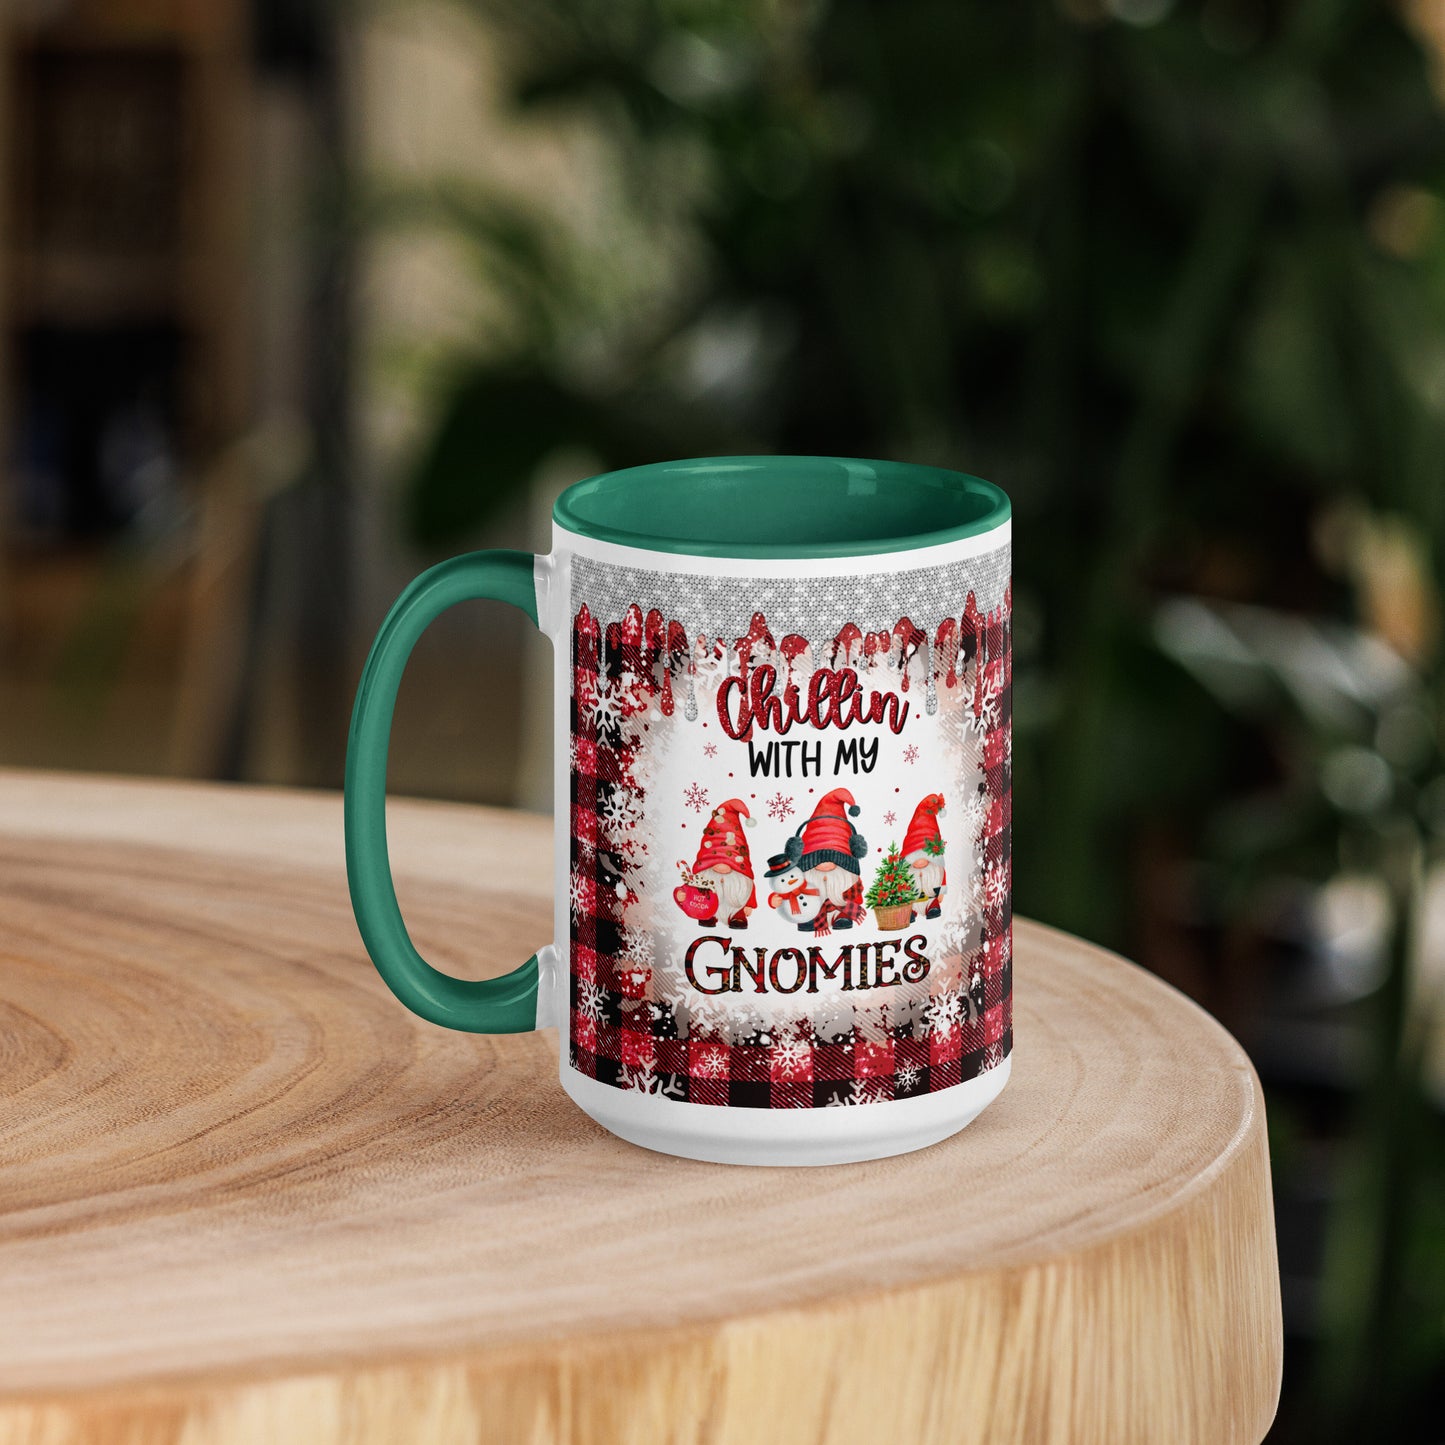 Chillin’ with my Gnomies Christmas Mug with Color Inside